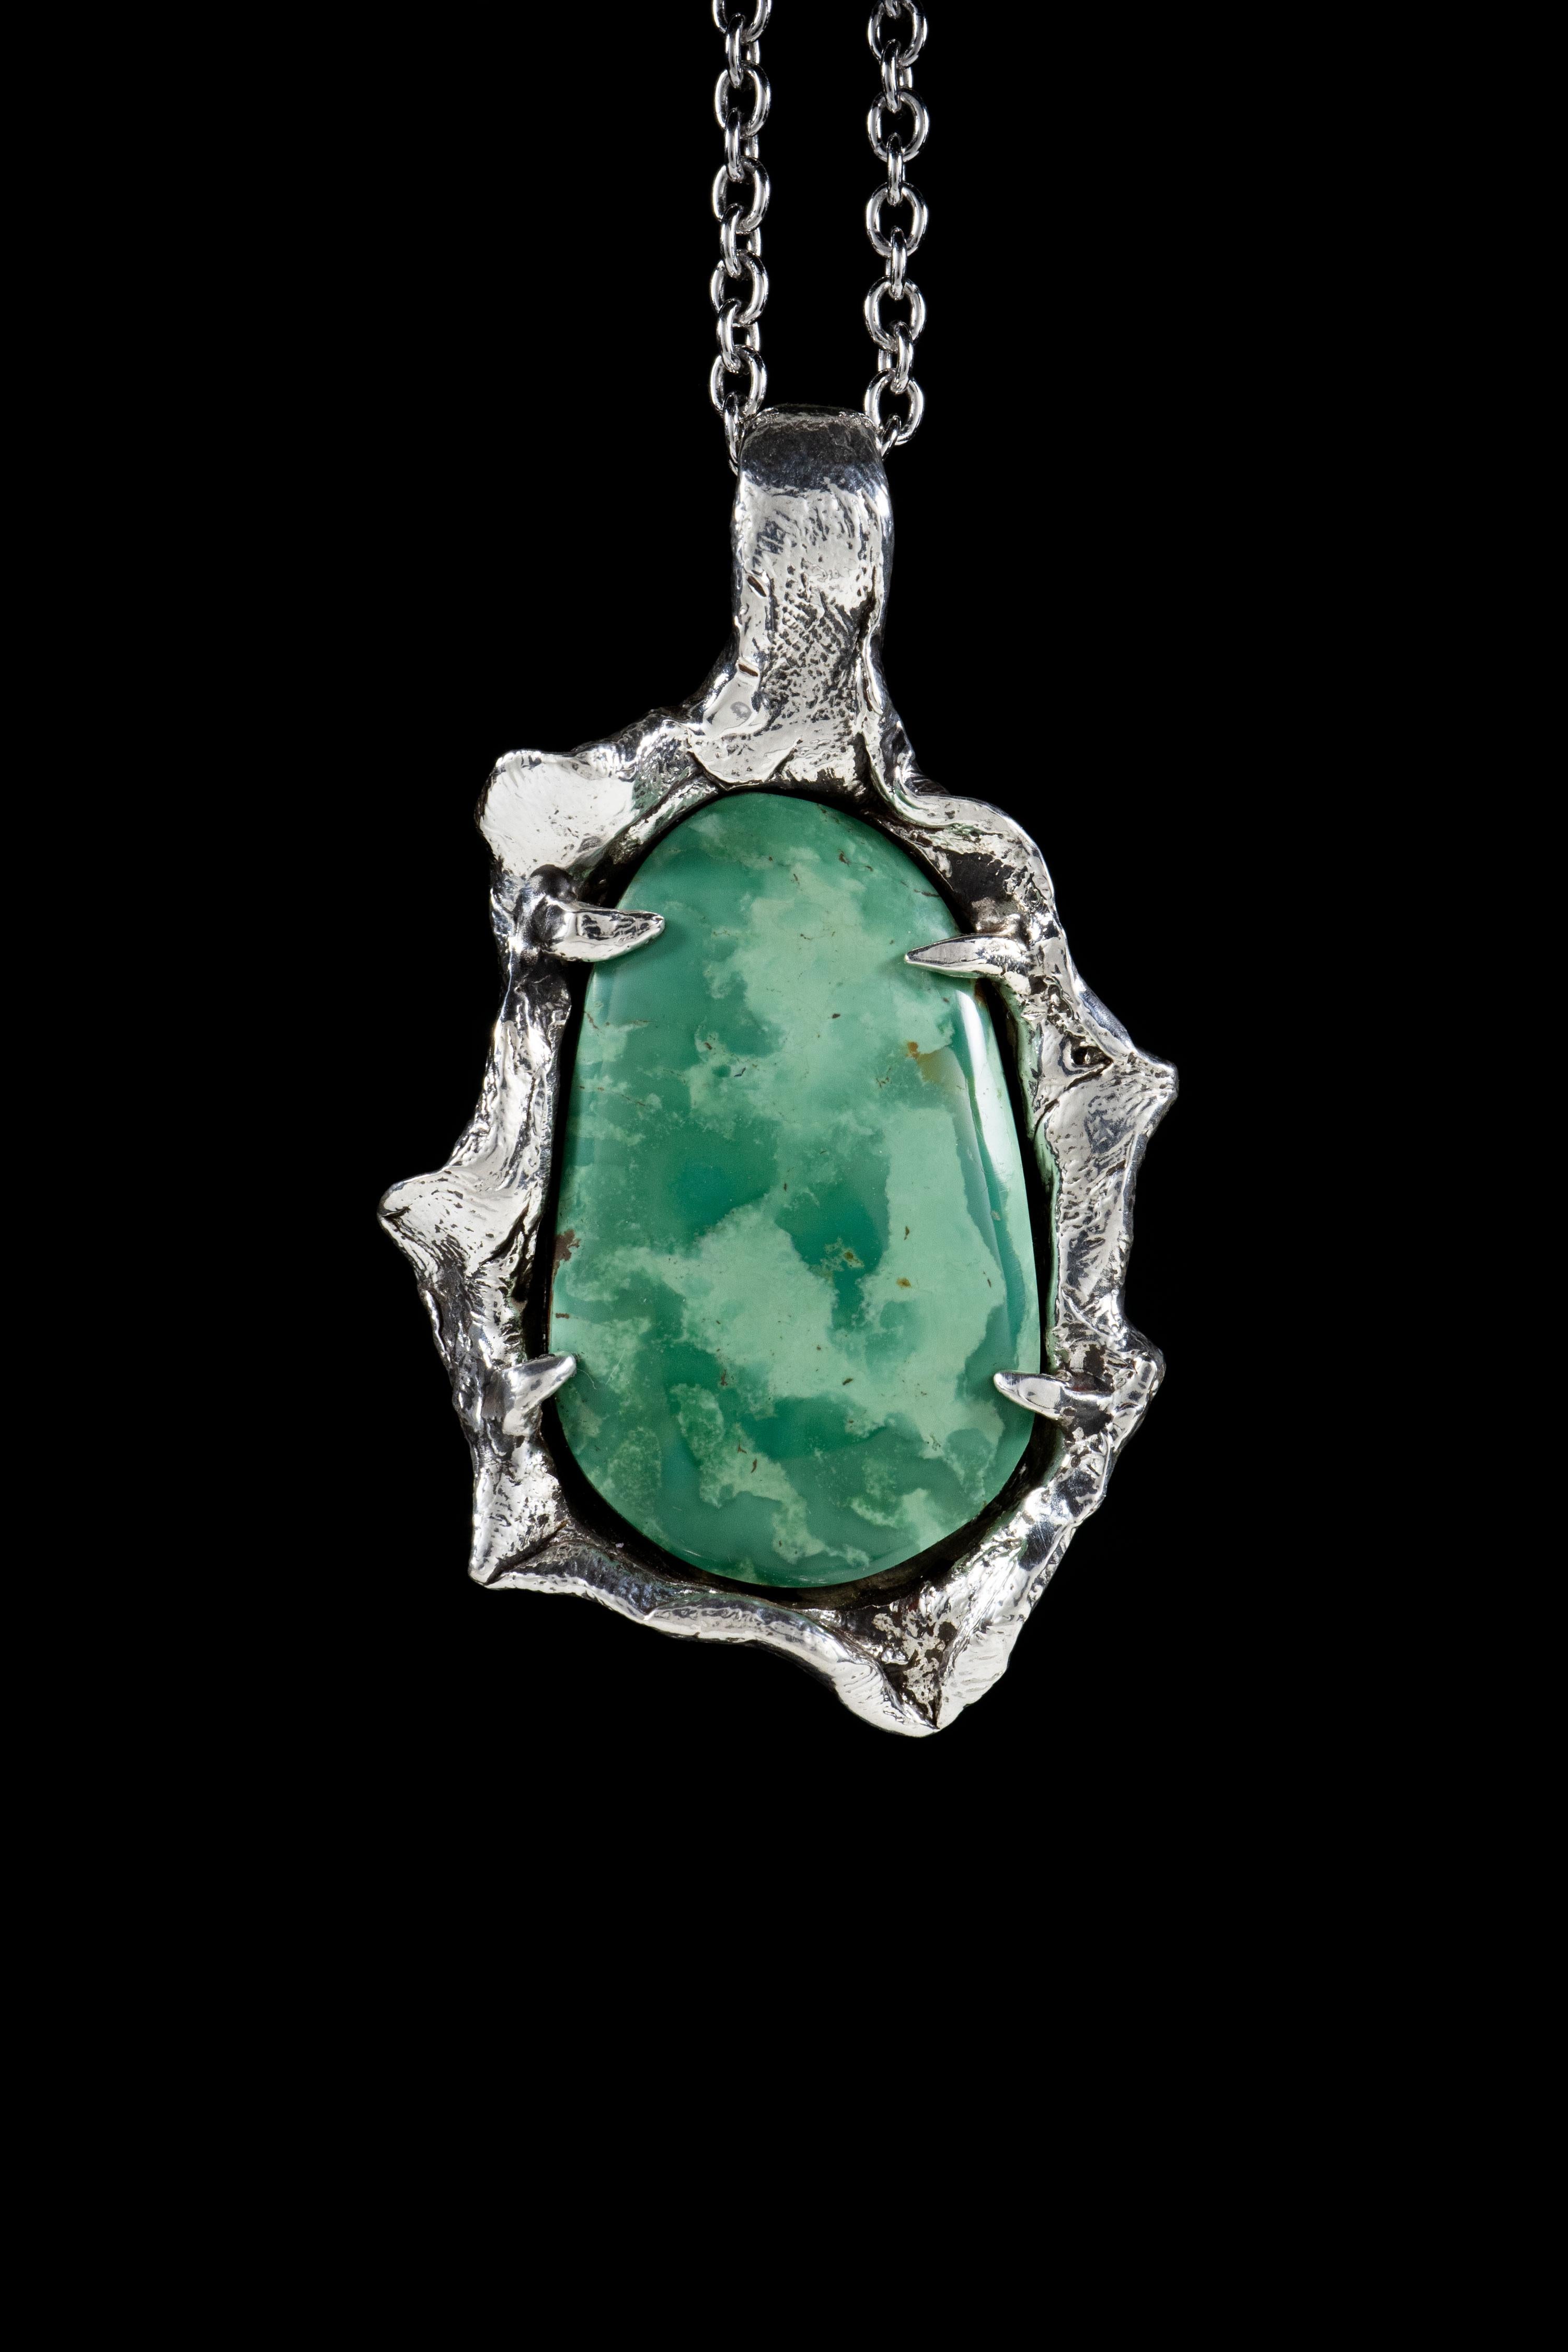 Tree Spirit is a stunning pendant handcrafted by Ken Fury in sterling silver, featuring a beautiful Manassa Turquoise stone. The pendant's intricate design symbolizes the interconnectedness of all living things and the importance of staying grounded